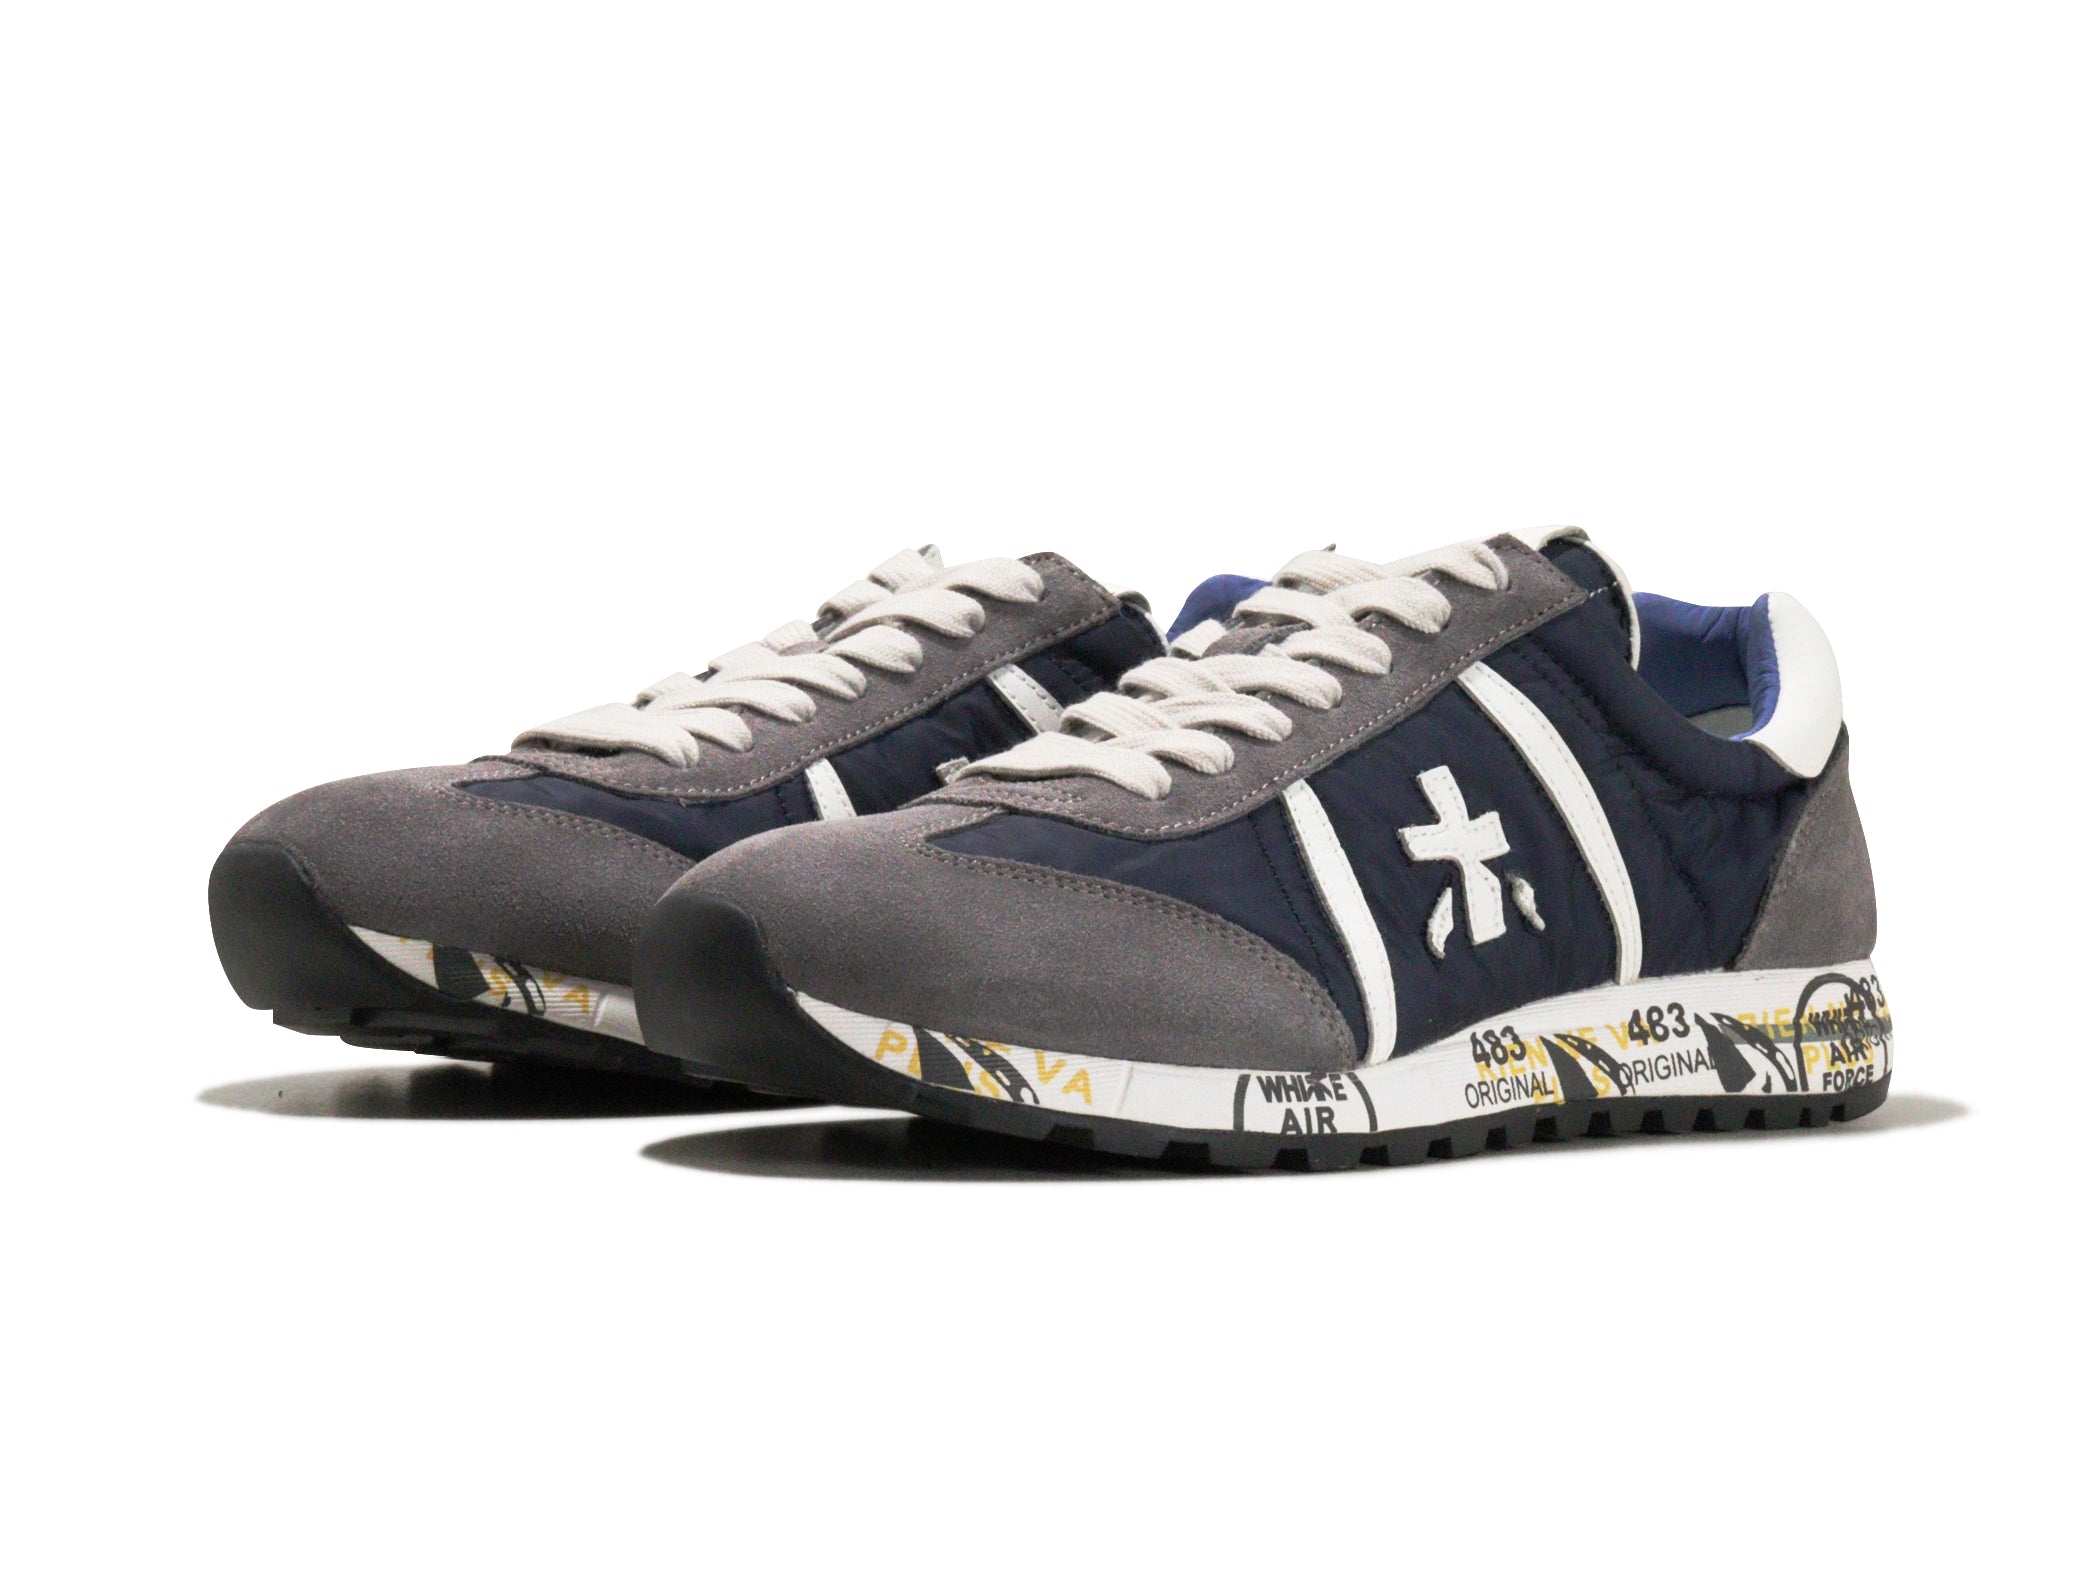 PREMIATA (プレミアータ) 600E LUCY ネイビー | GLOBAL SHOES GALLERY ...